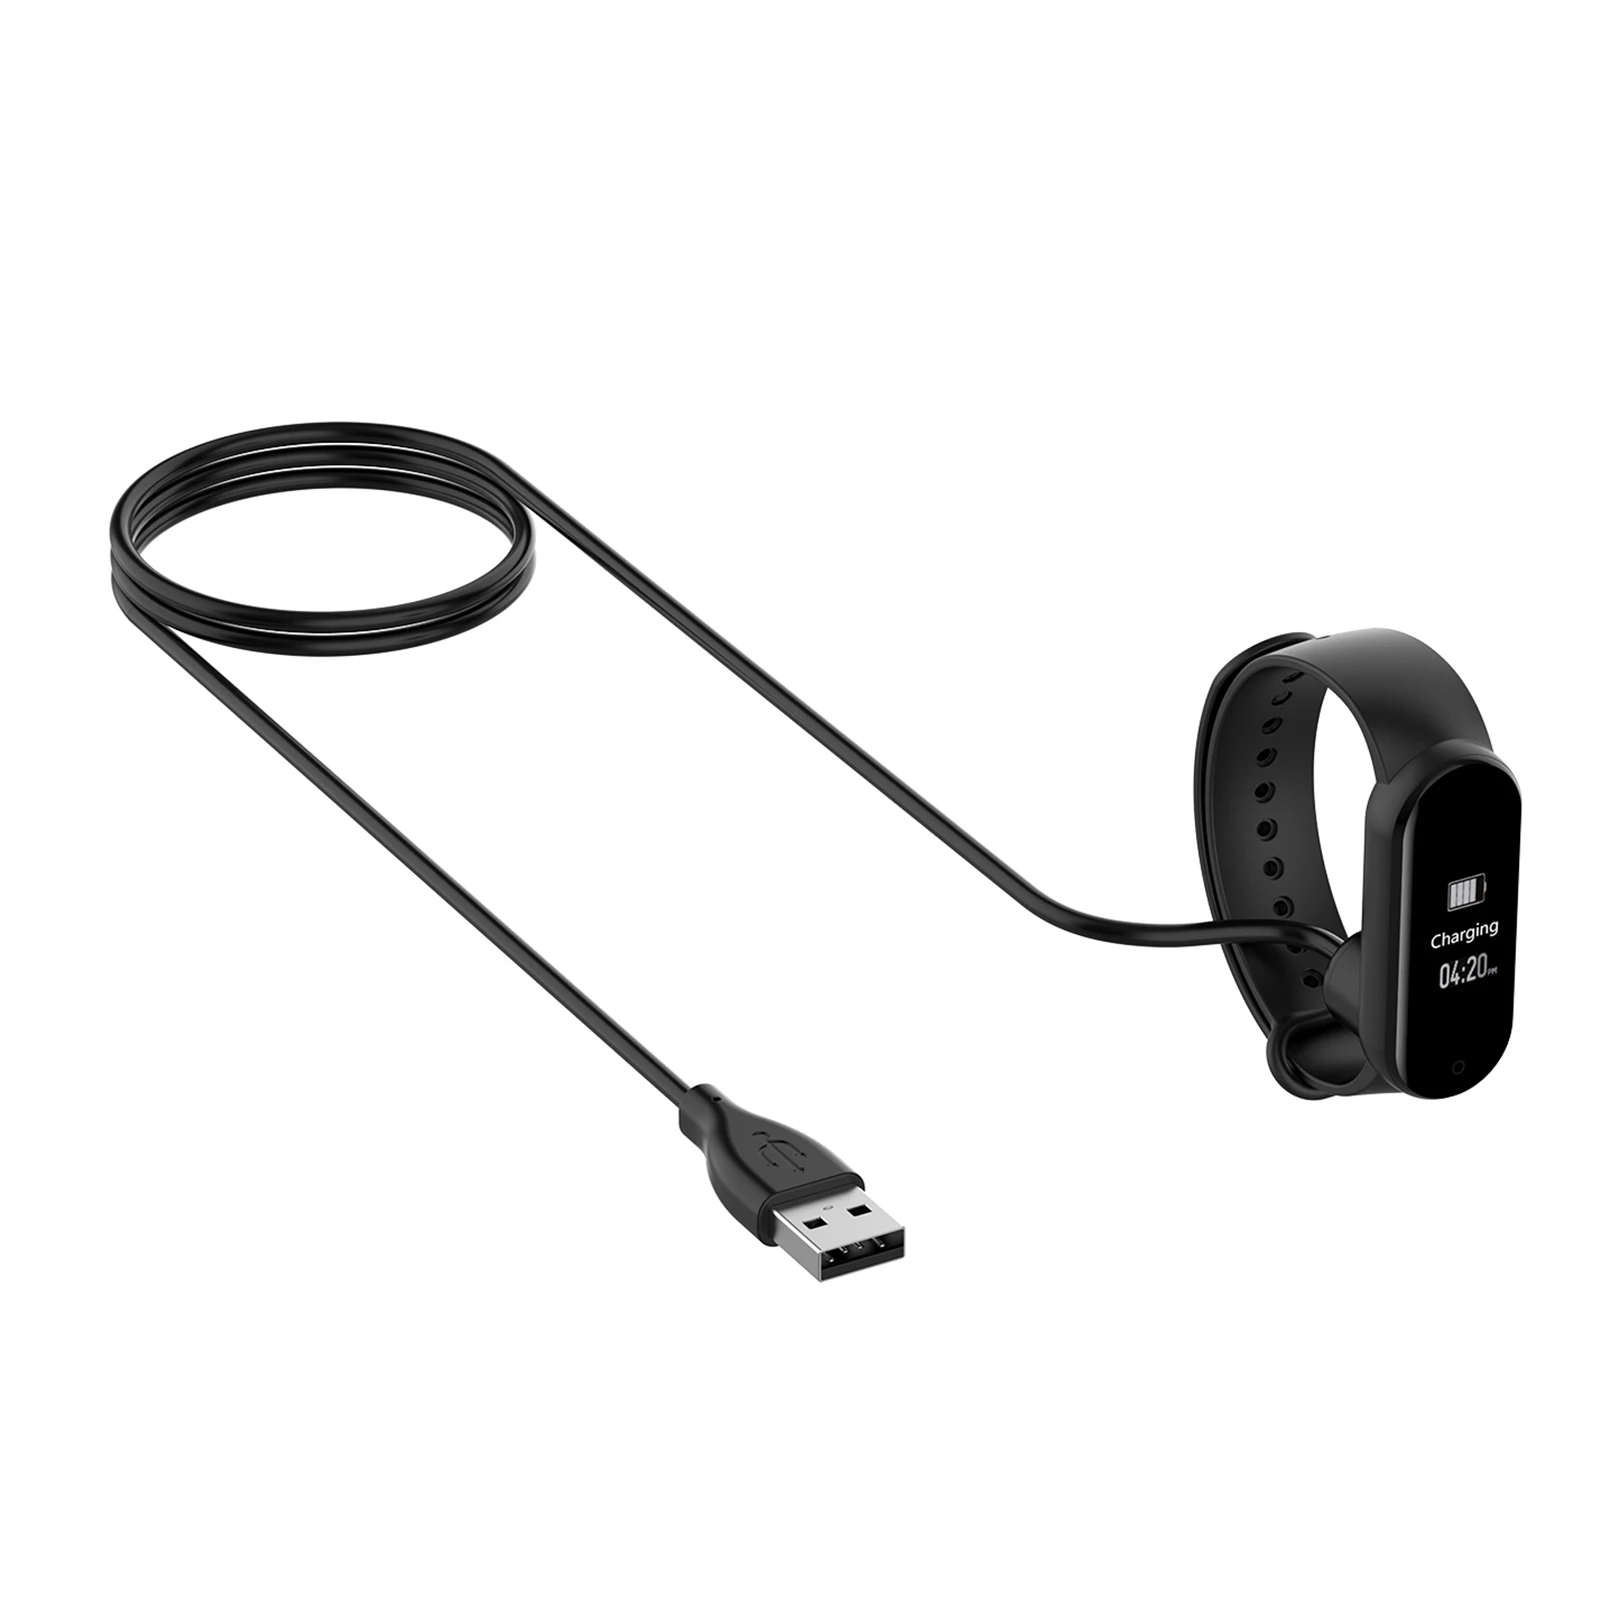 

Magnetic USB Charging Cable Cord Dock Fast Charger Adapter For XiaomiMi Band 4/5/6/7 Smart Wristband Accessories Wearable Device